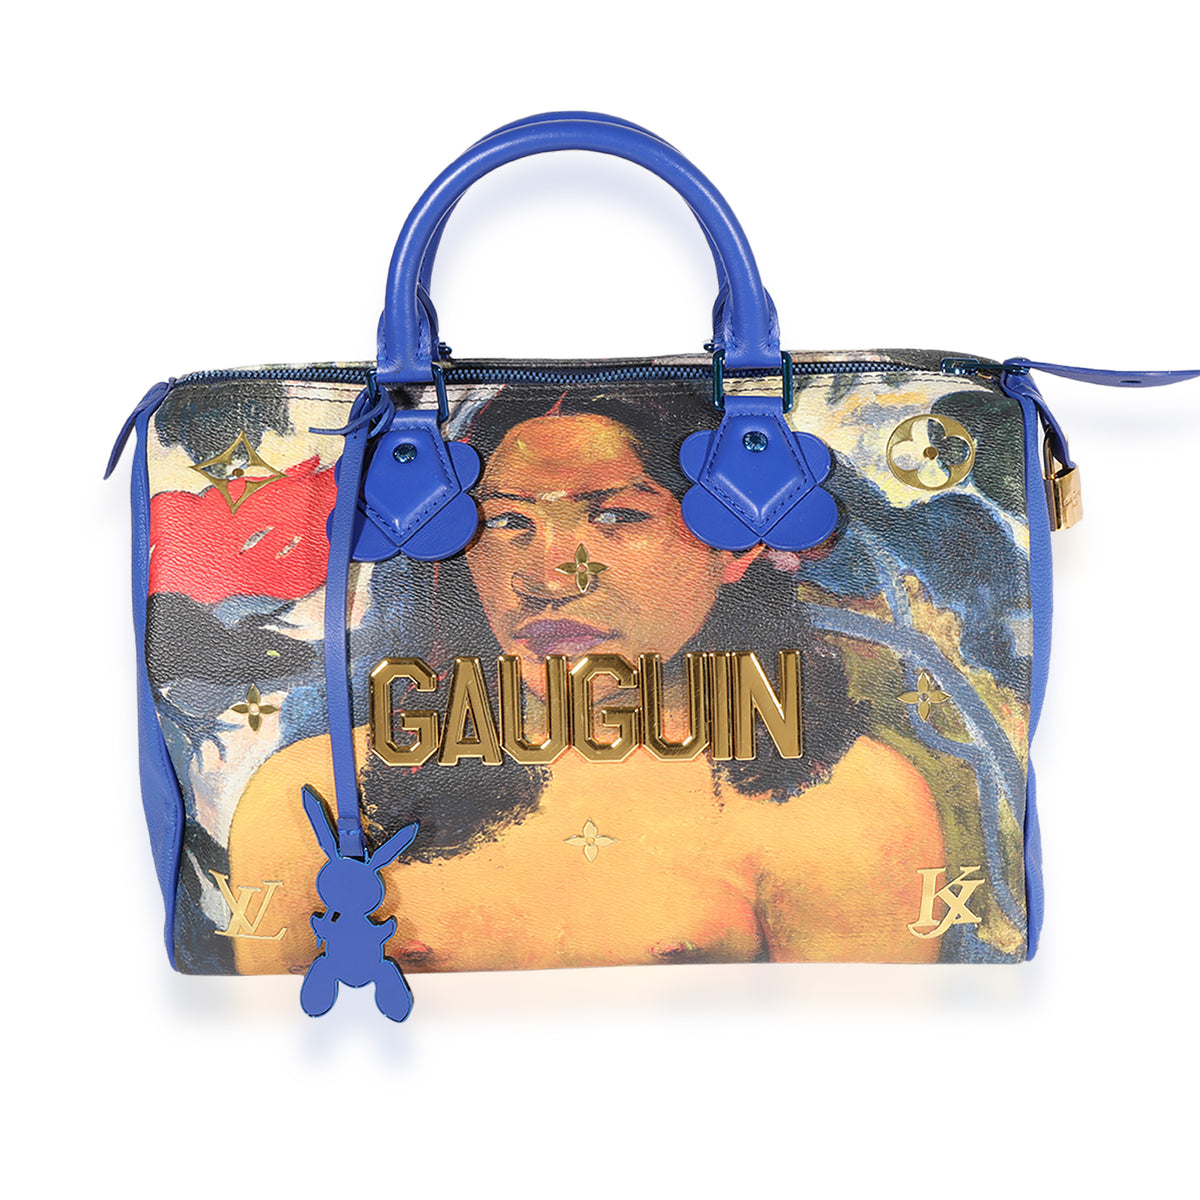 Our images are looking good Jeff Koons for Louis Vuitton